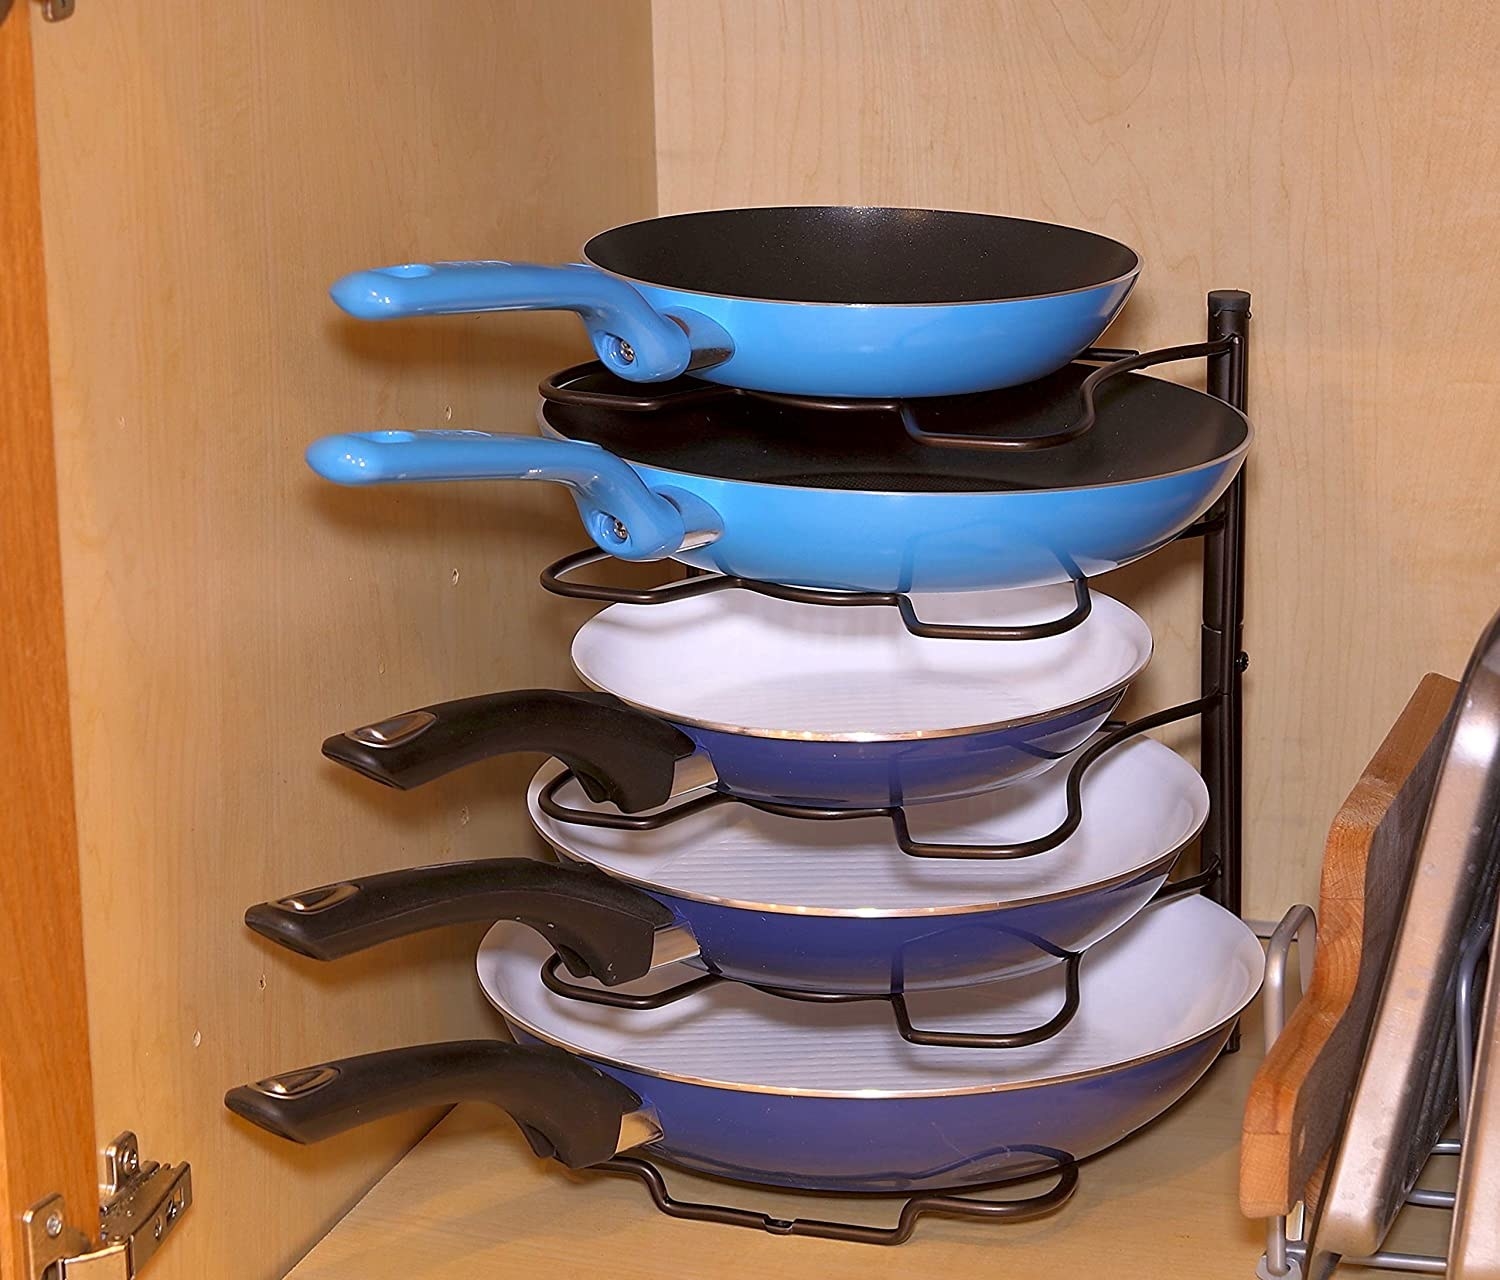 the pan rack with pans in it